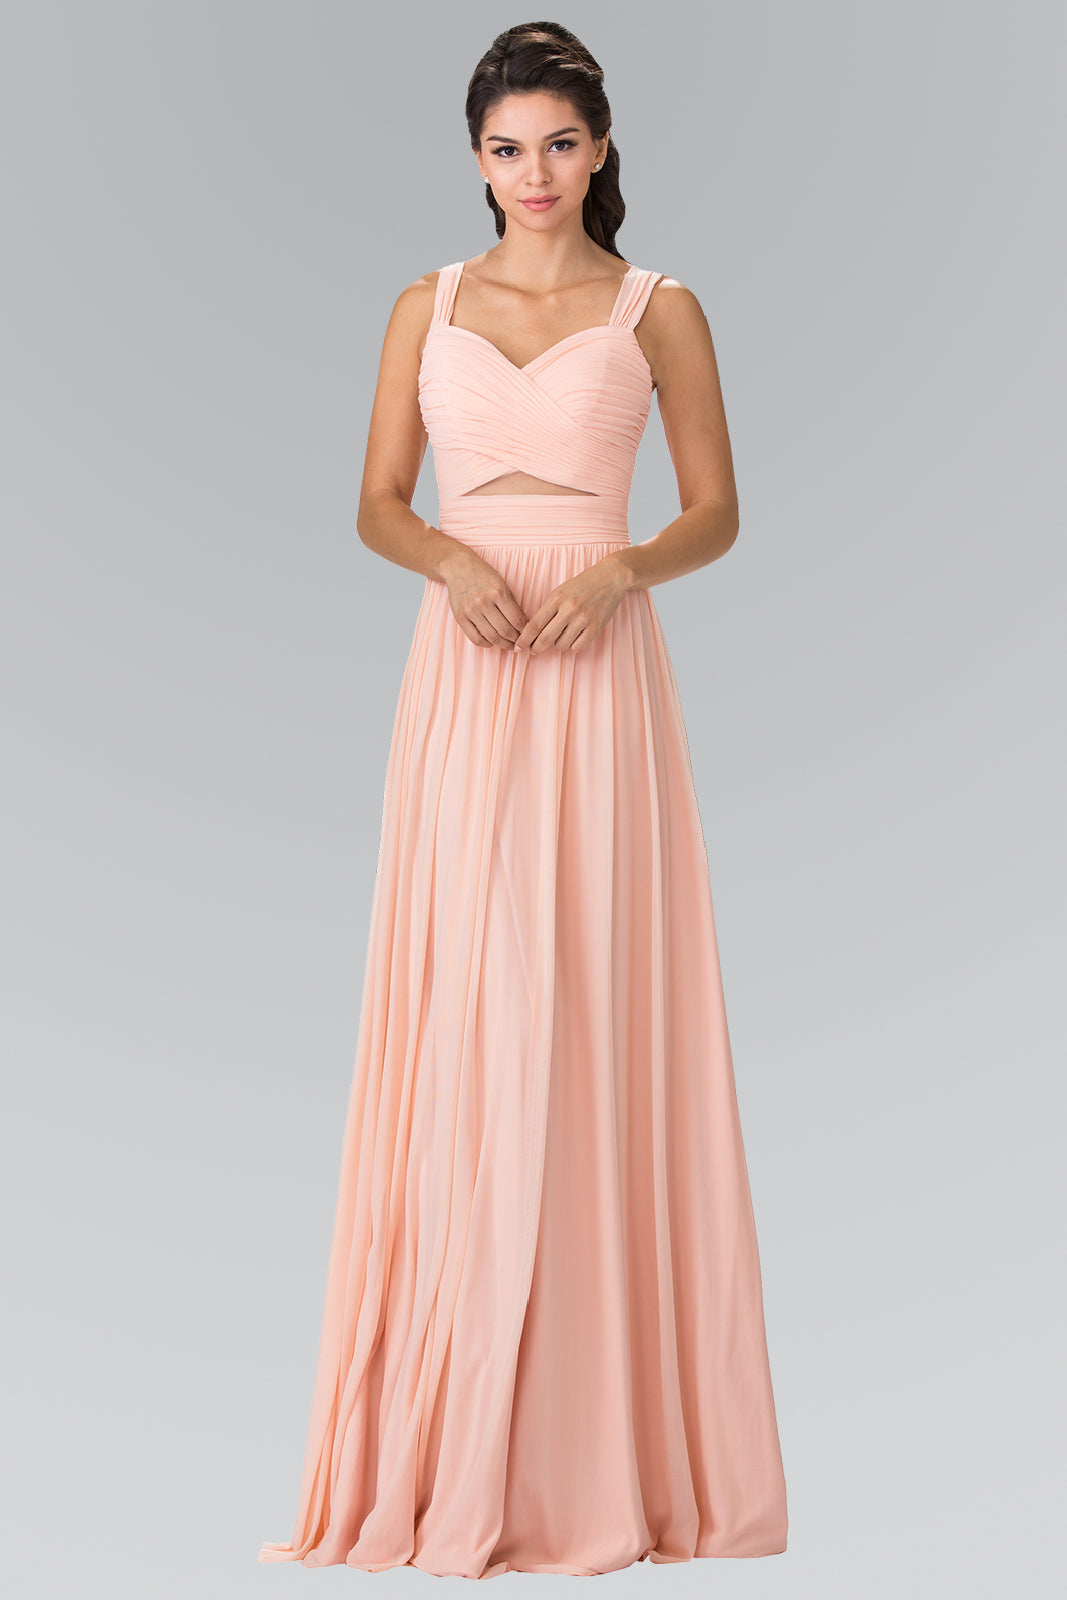 GLS COLLECTIVE - GL2366 - Mint Size M, Blush Size XS or Burgundy 3XL - Pleated Bodice Bridesmaids Long Dress